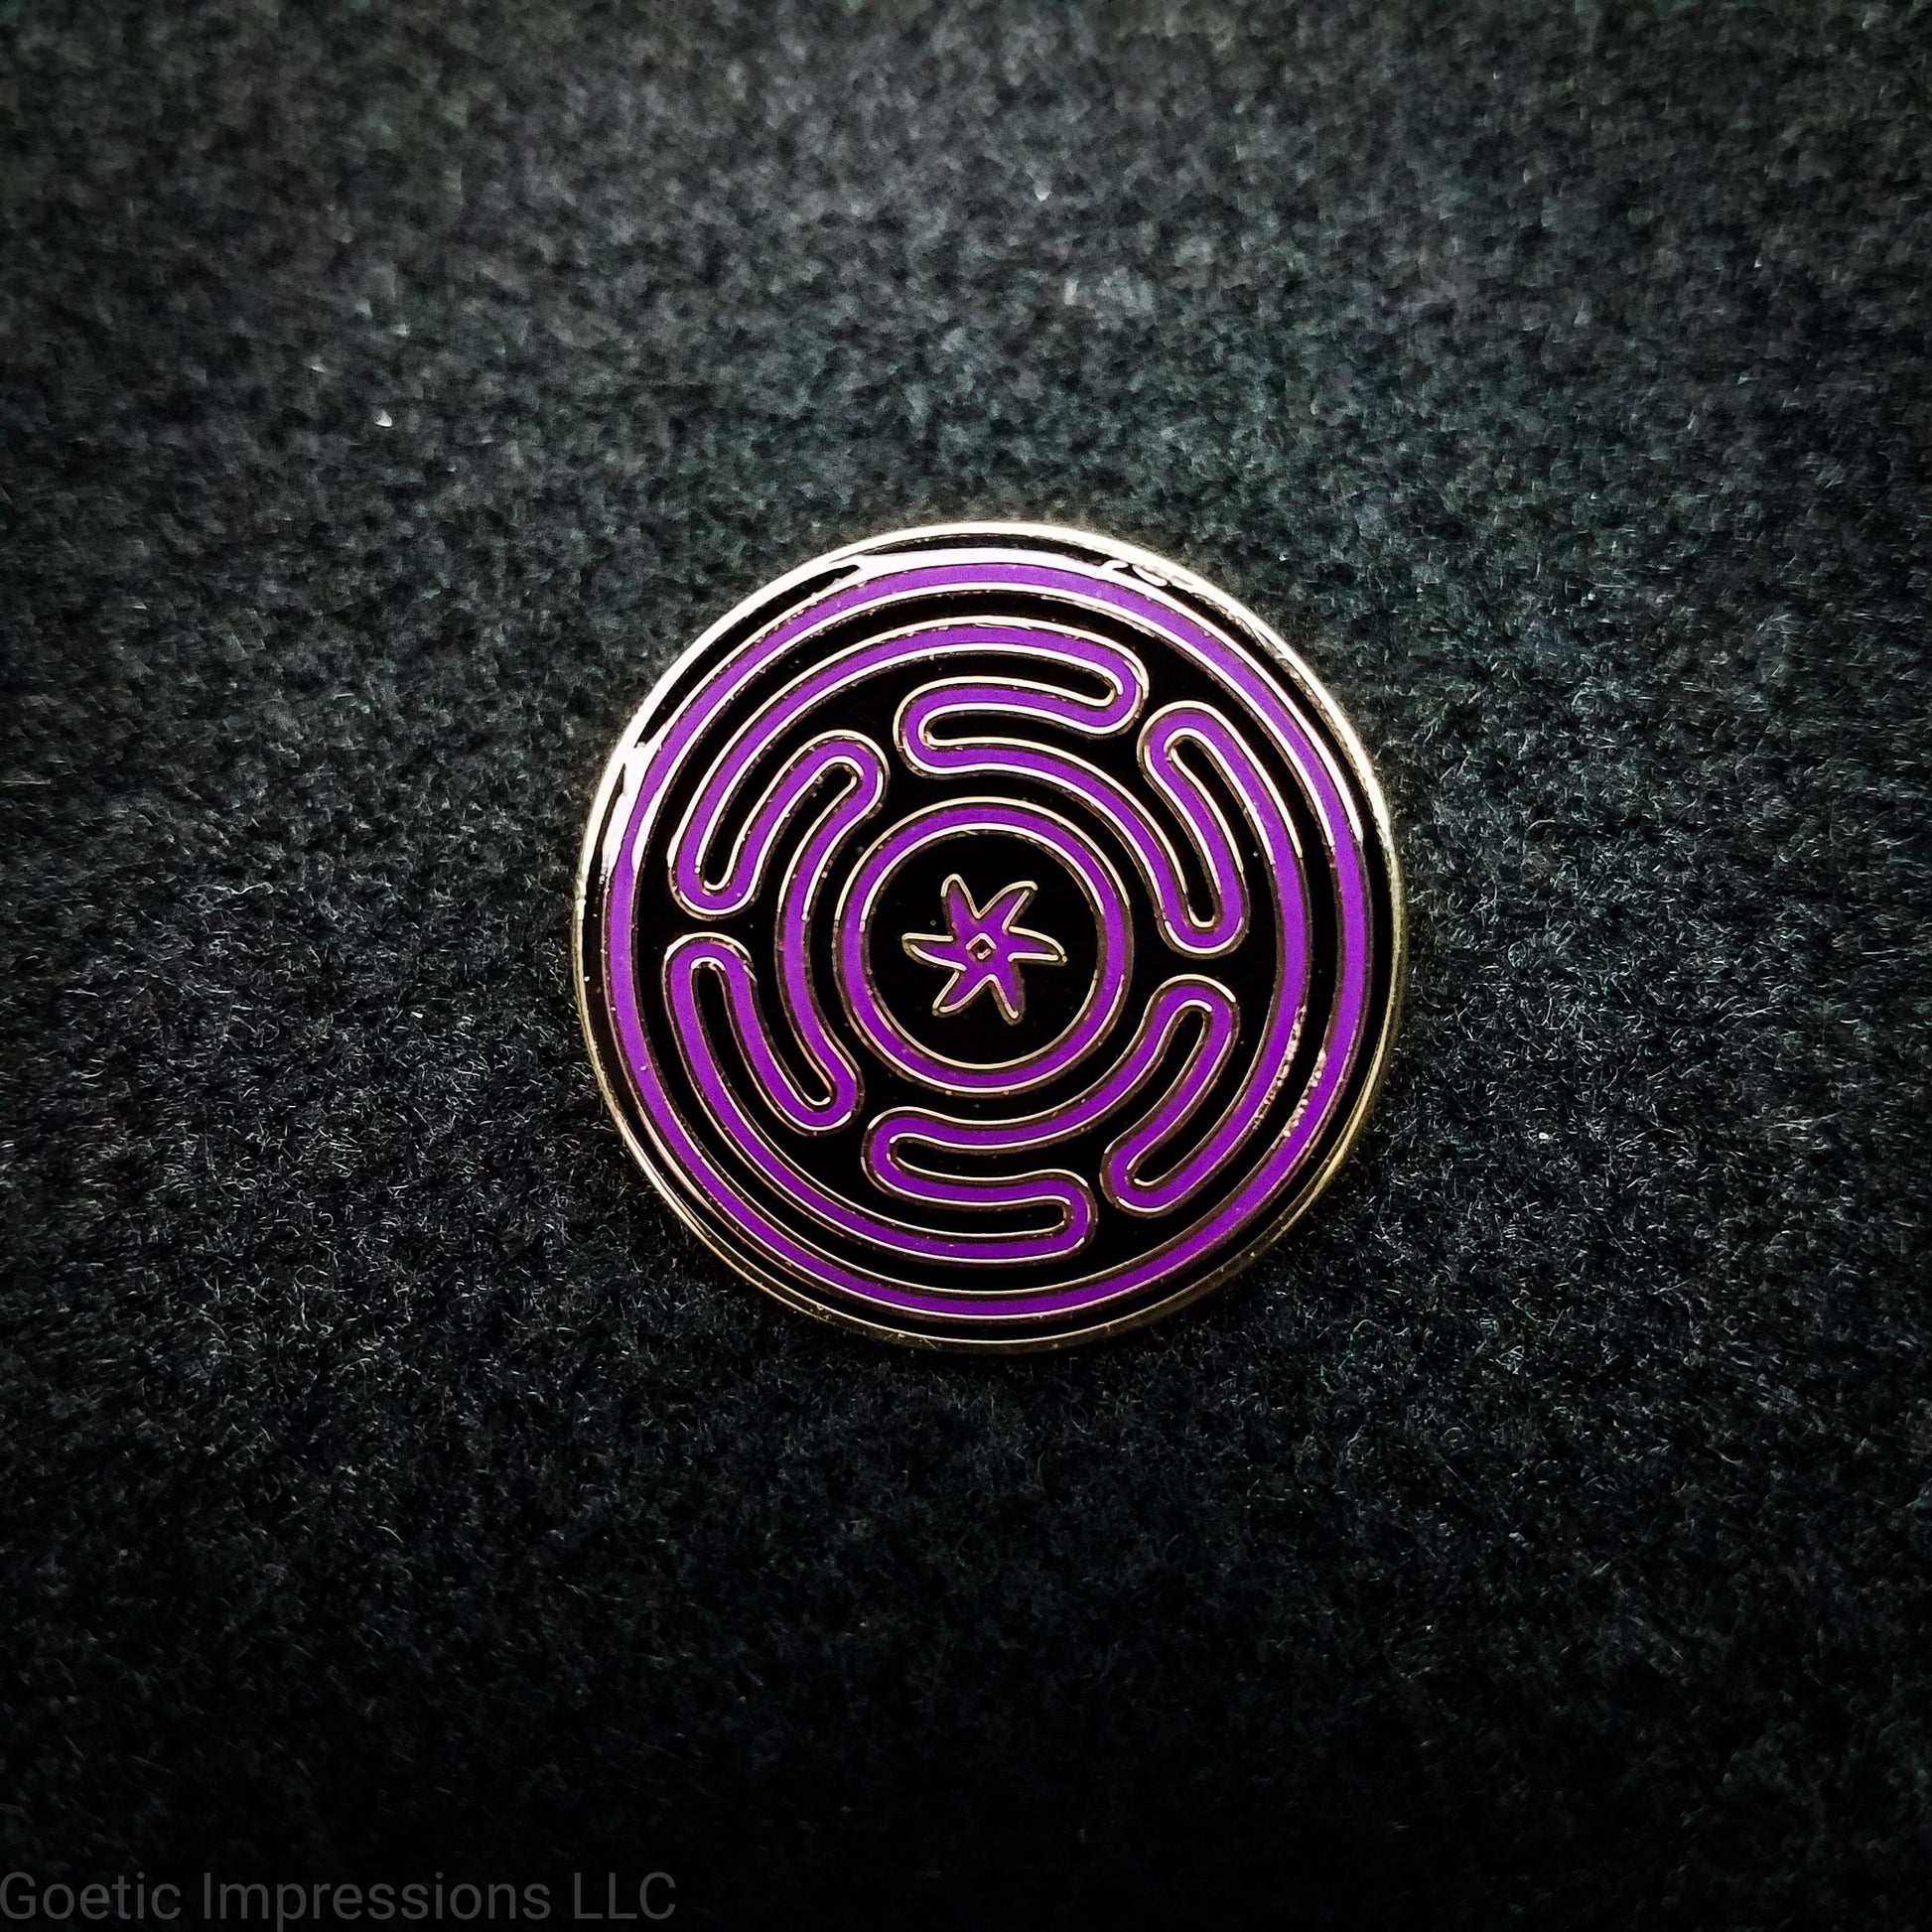 Wheel of Hecate sigil pin that is gold plated. The sigil is purple on a black background.